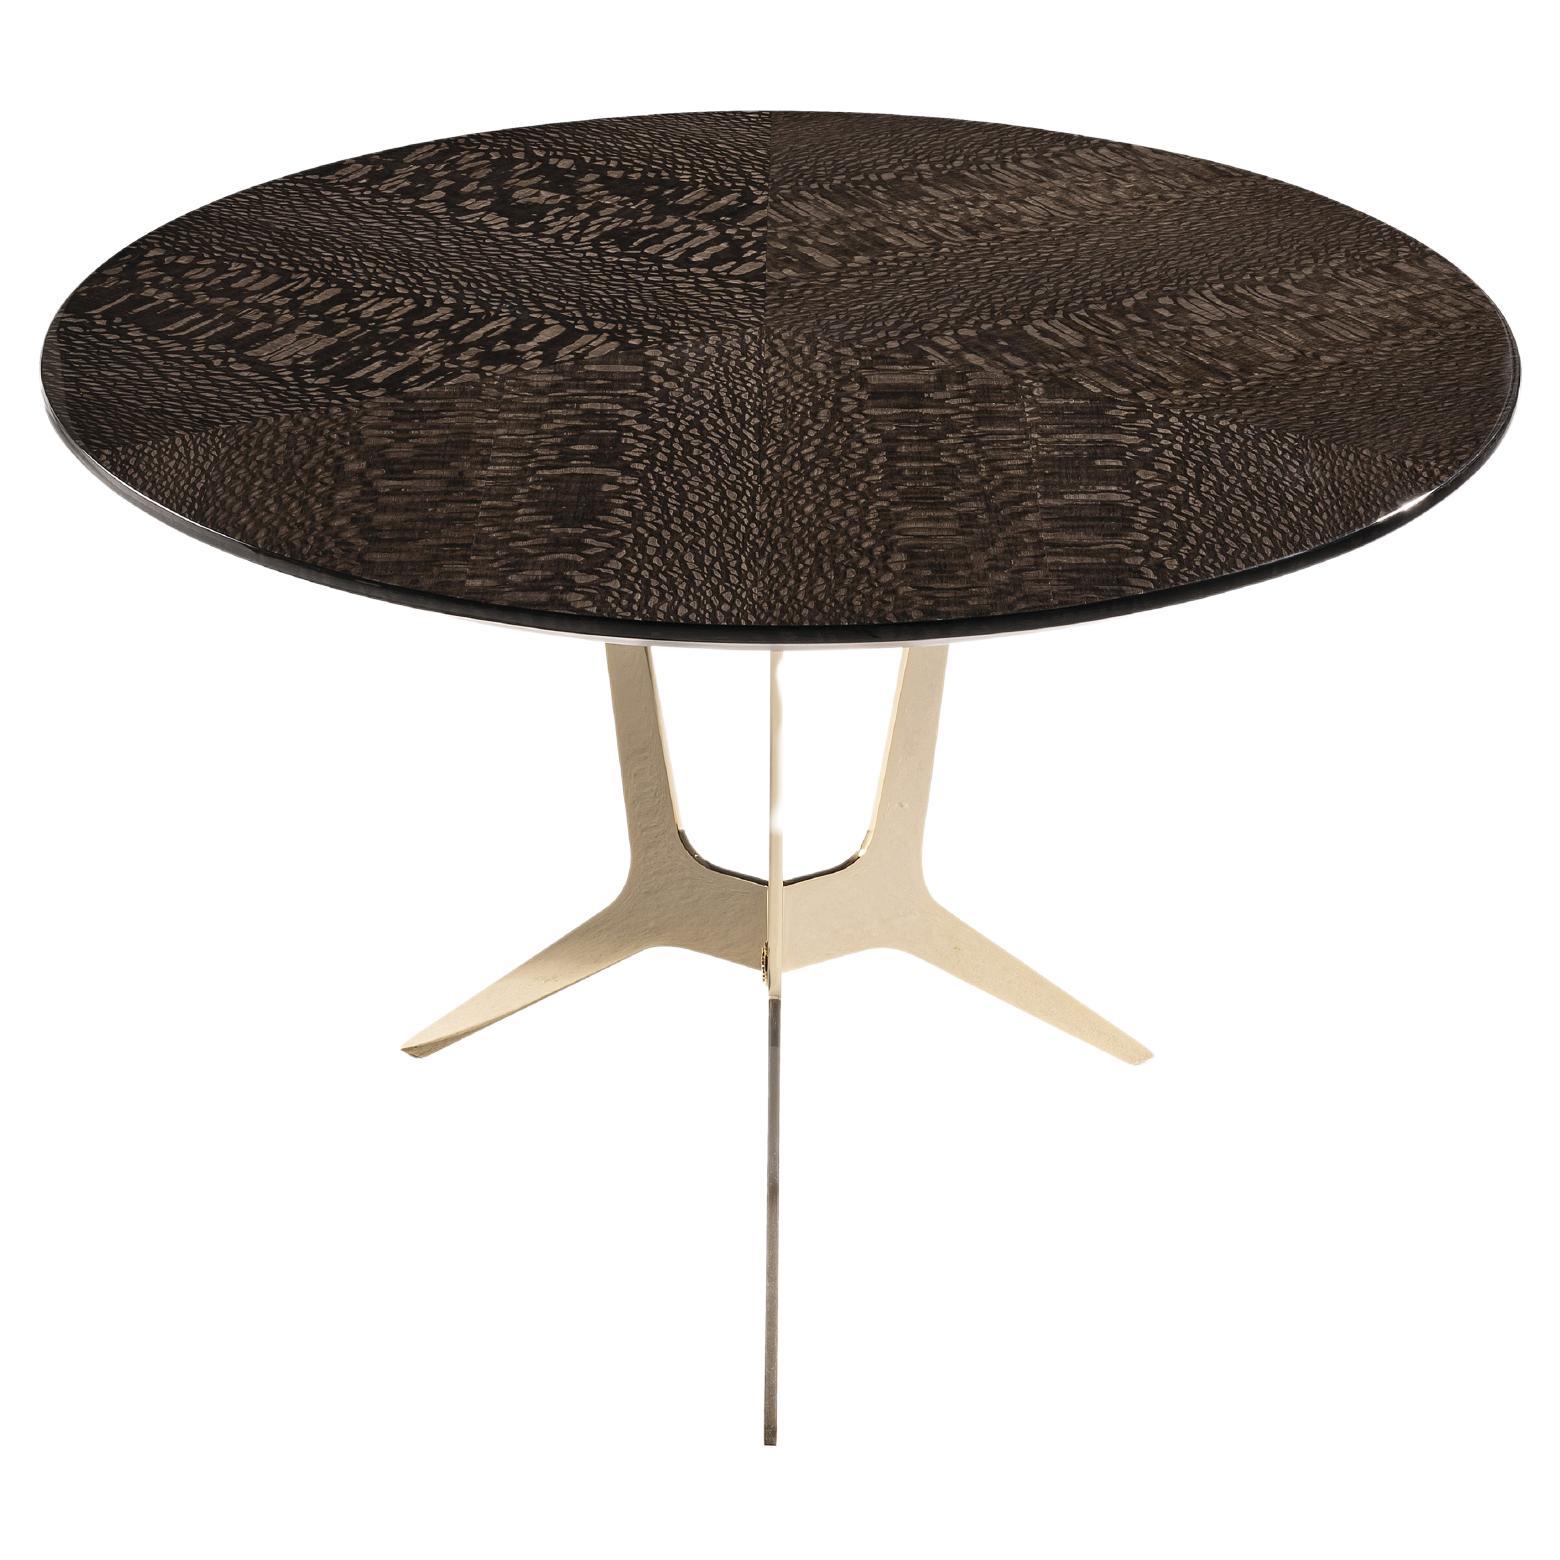 21st Century Cooper Side Table in Carbalho by Roberto Cavalli Home Interiors For Sale